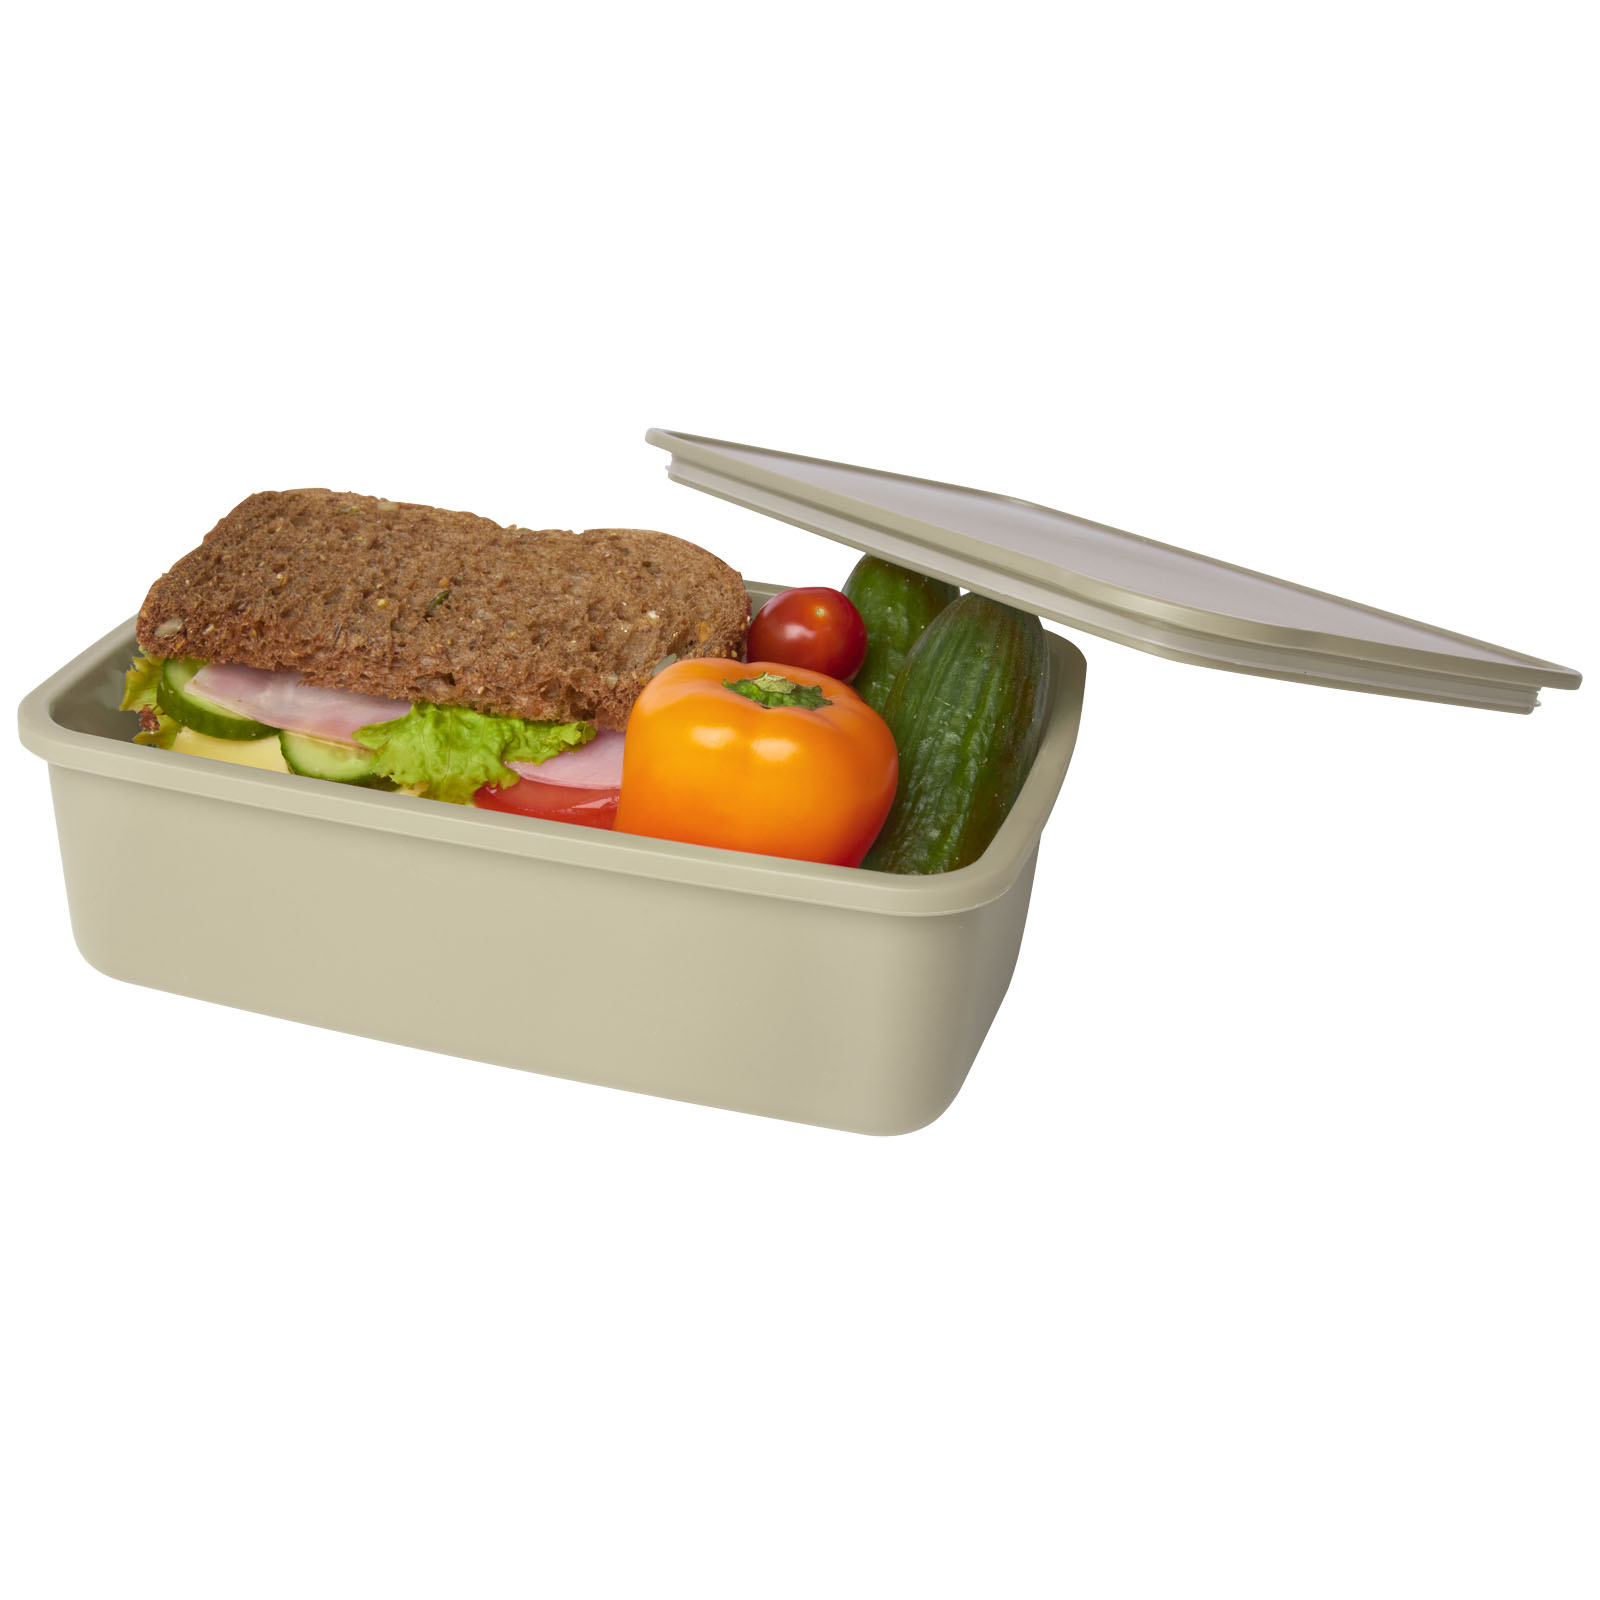 Advertising Lunch Boxes - Dovi recycled plastic lunch box - 2